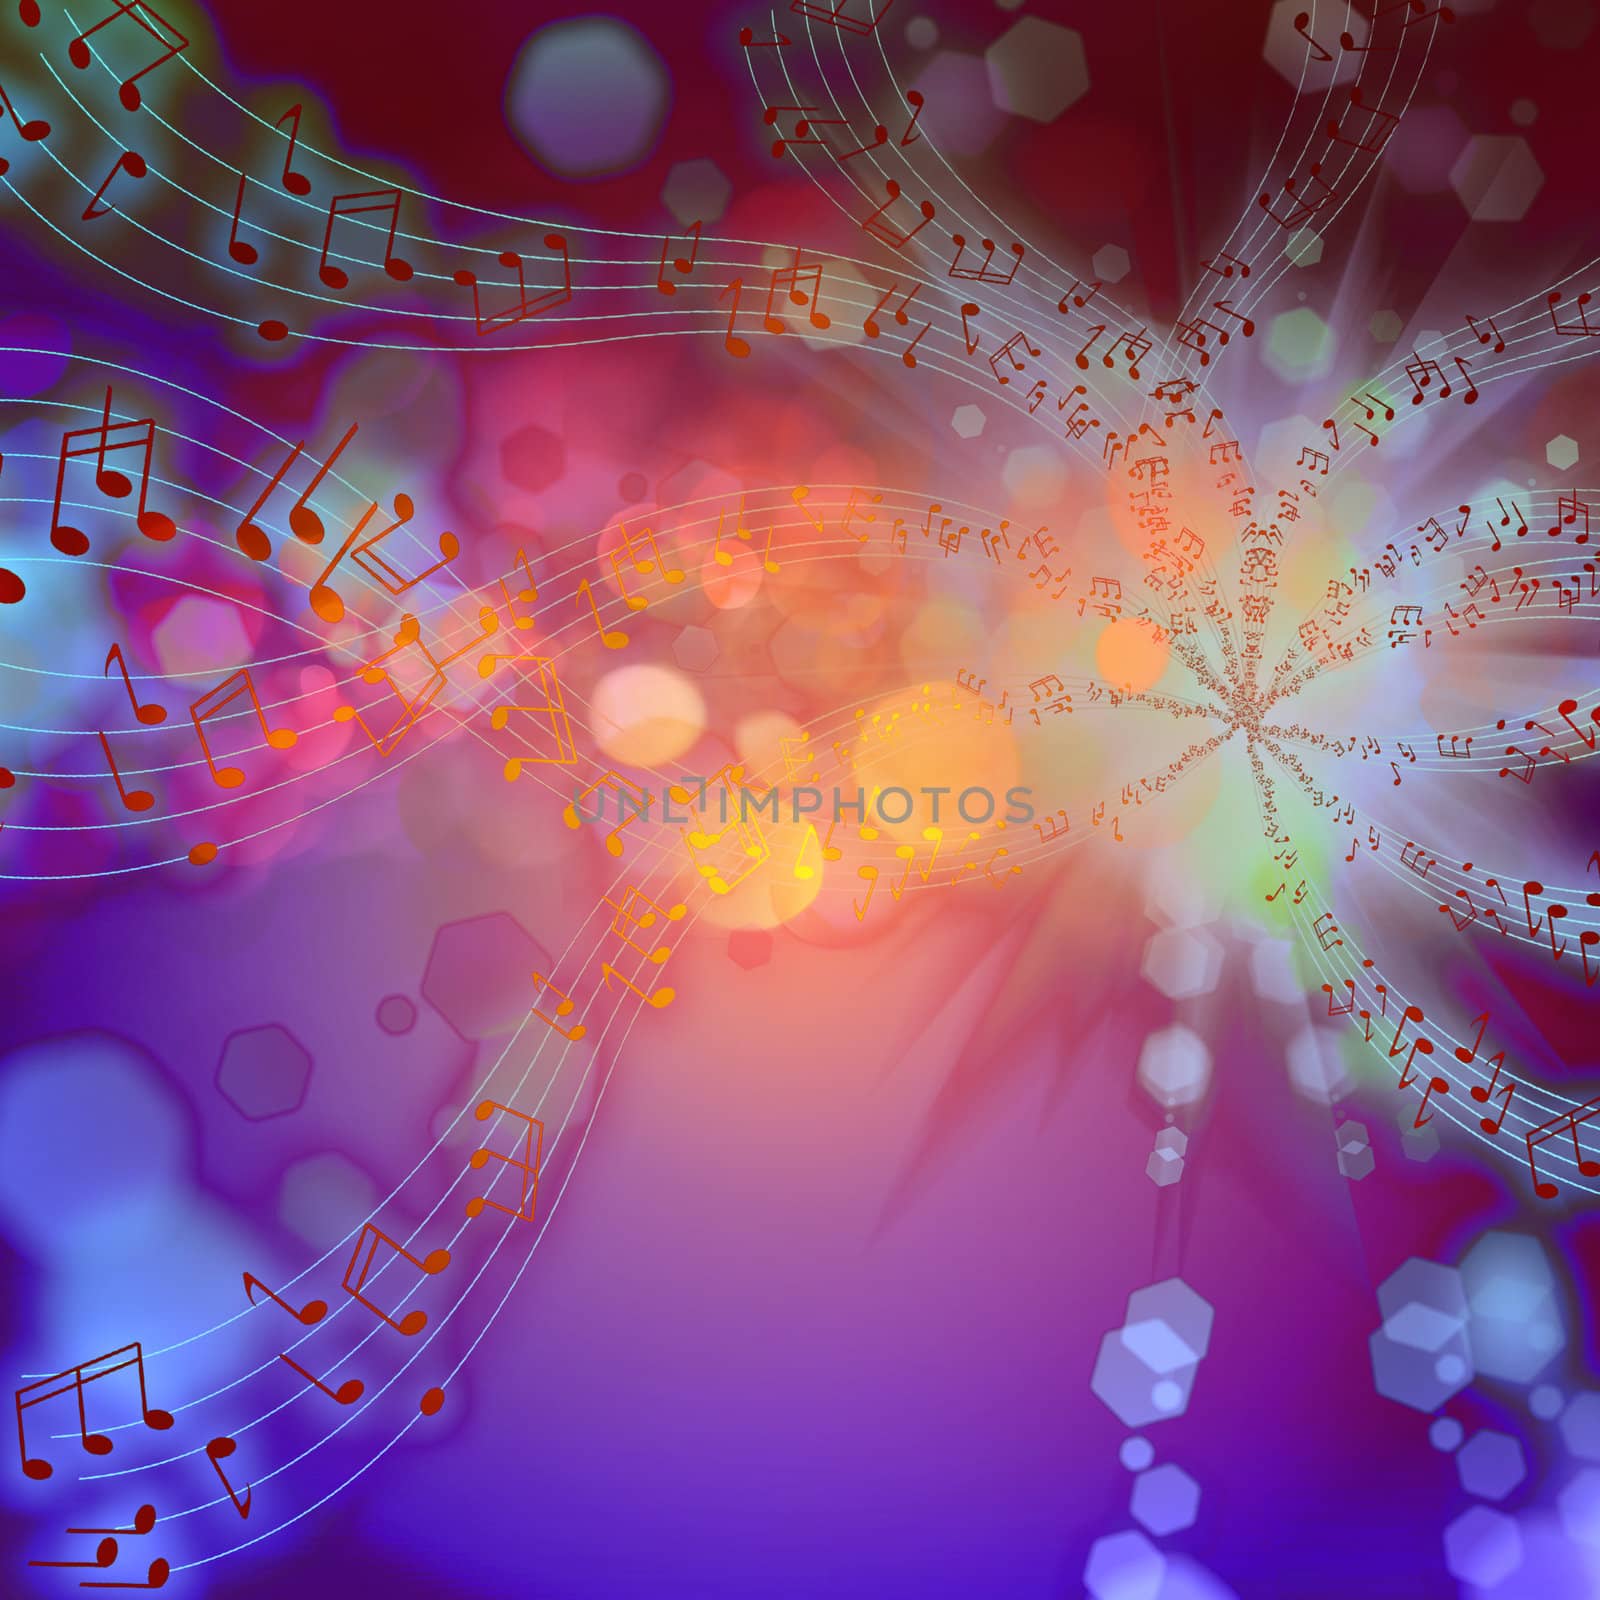 The musical abstract background by sergey150770SV